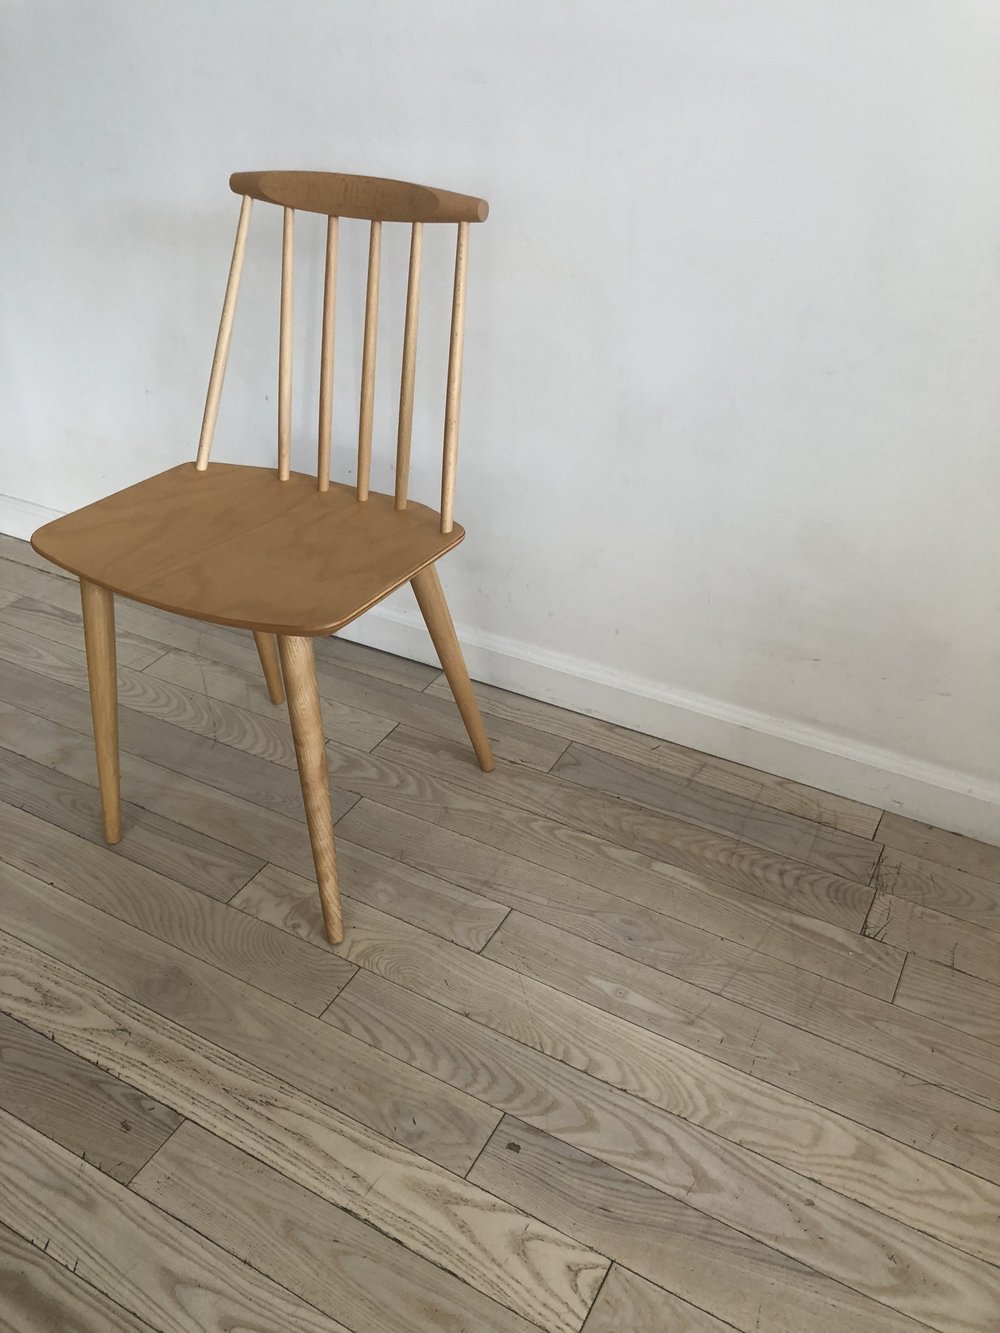 1978 Folke Palsson J77 Chairs for FDB Mobler, Made in Denmark-Set of 4 ...